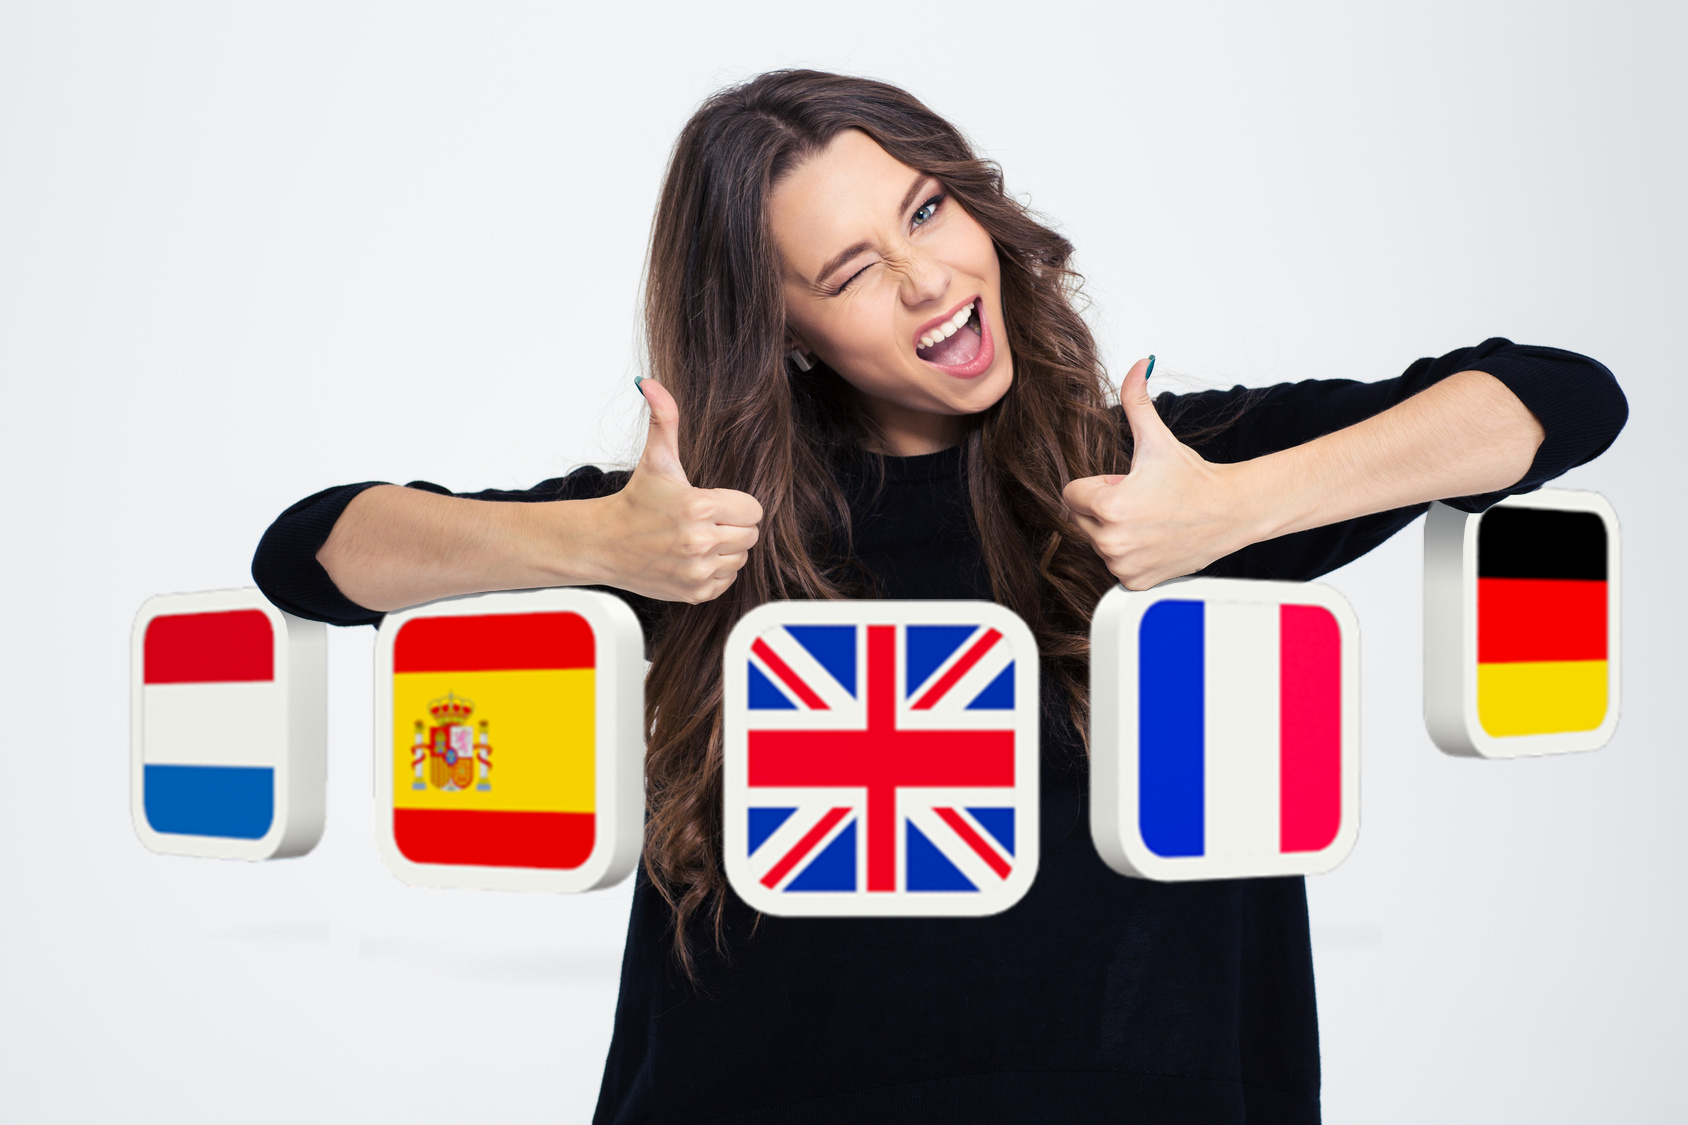 Learn a Language the Fun & Easy Way!

Unlimited Online Language Lessons (French, German, Spanish, Dutch or English) with Captain Language


	6 months lessons: 284 CHF 54
	12 months lessons: 524 CHF 79
	24 months lessons: 983 CHF 119
	(Bonus: Get 6 additional months free!)

 Photo